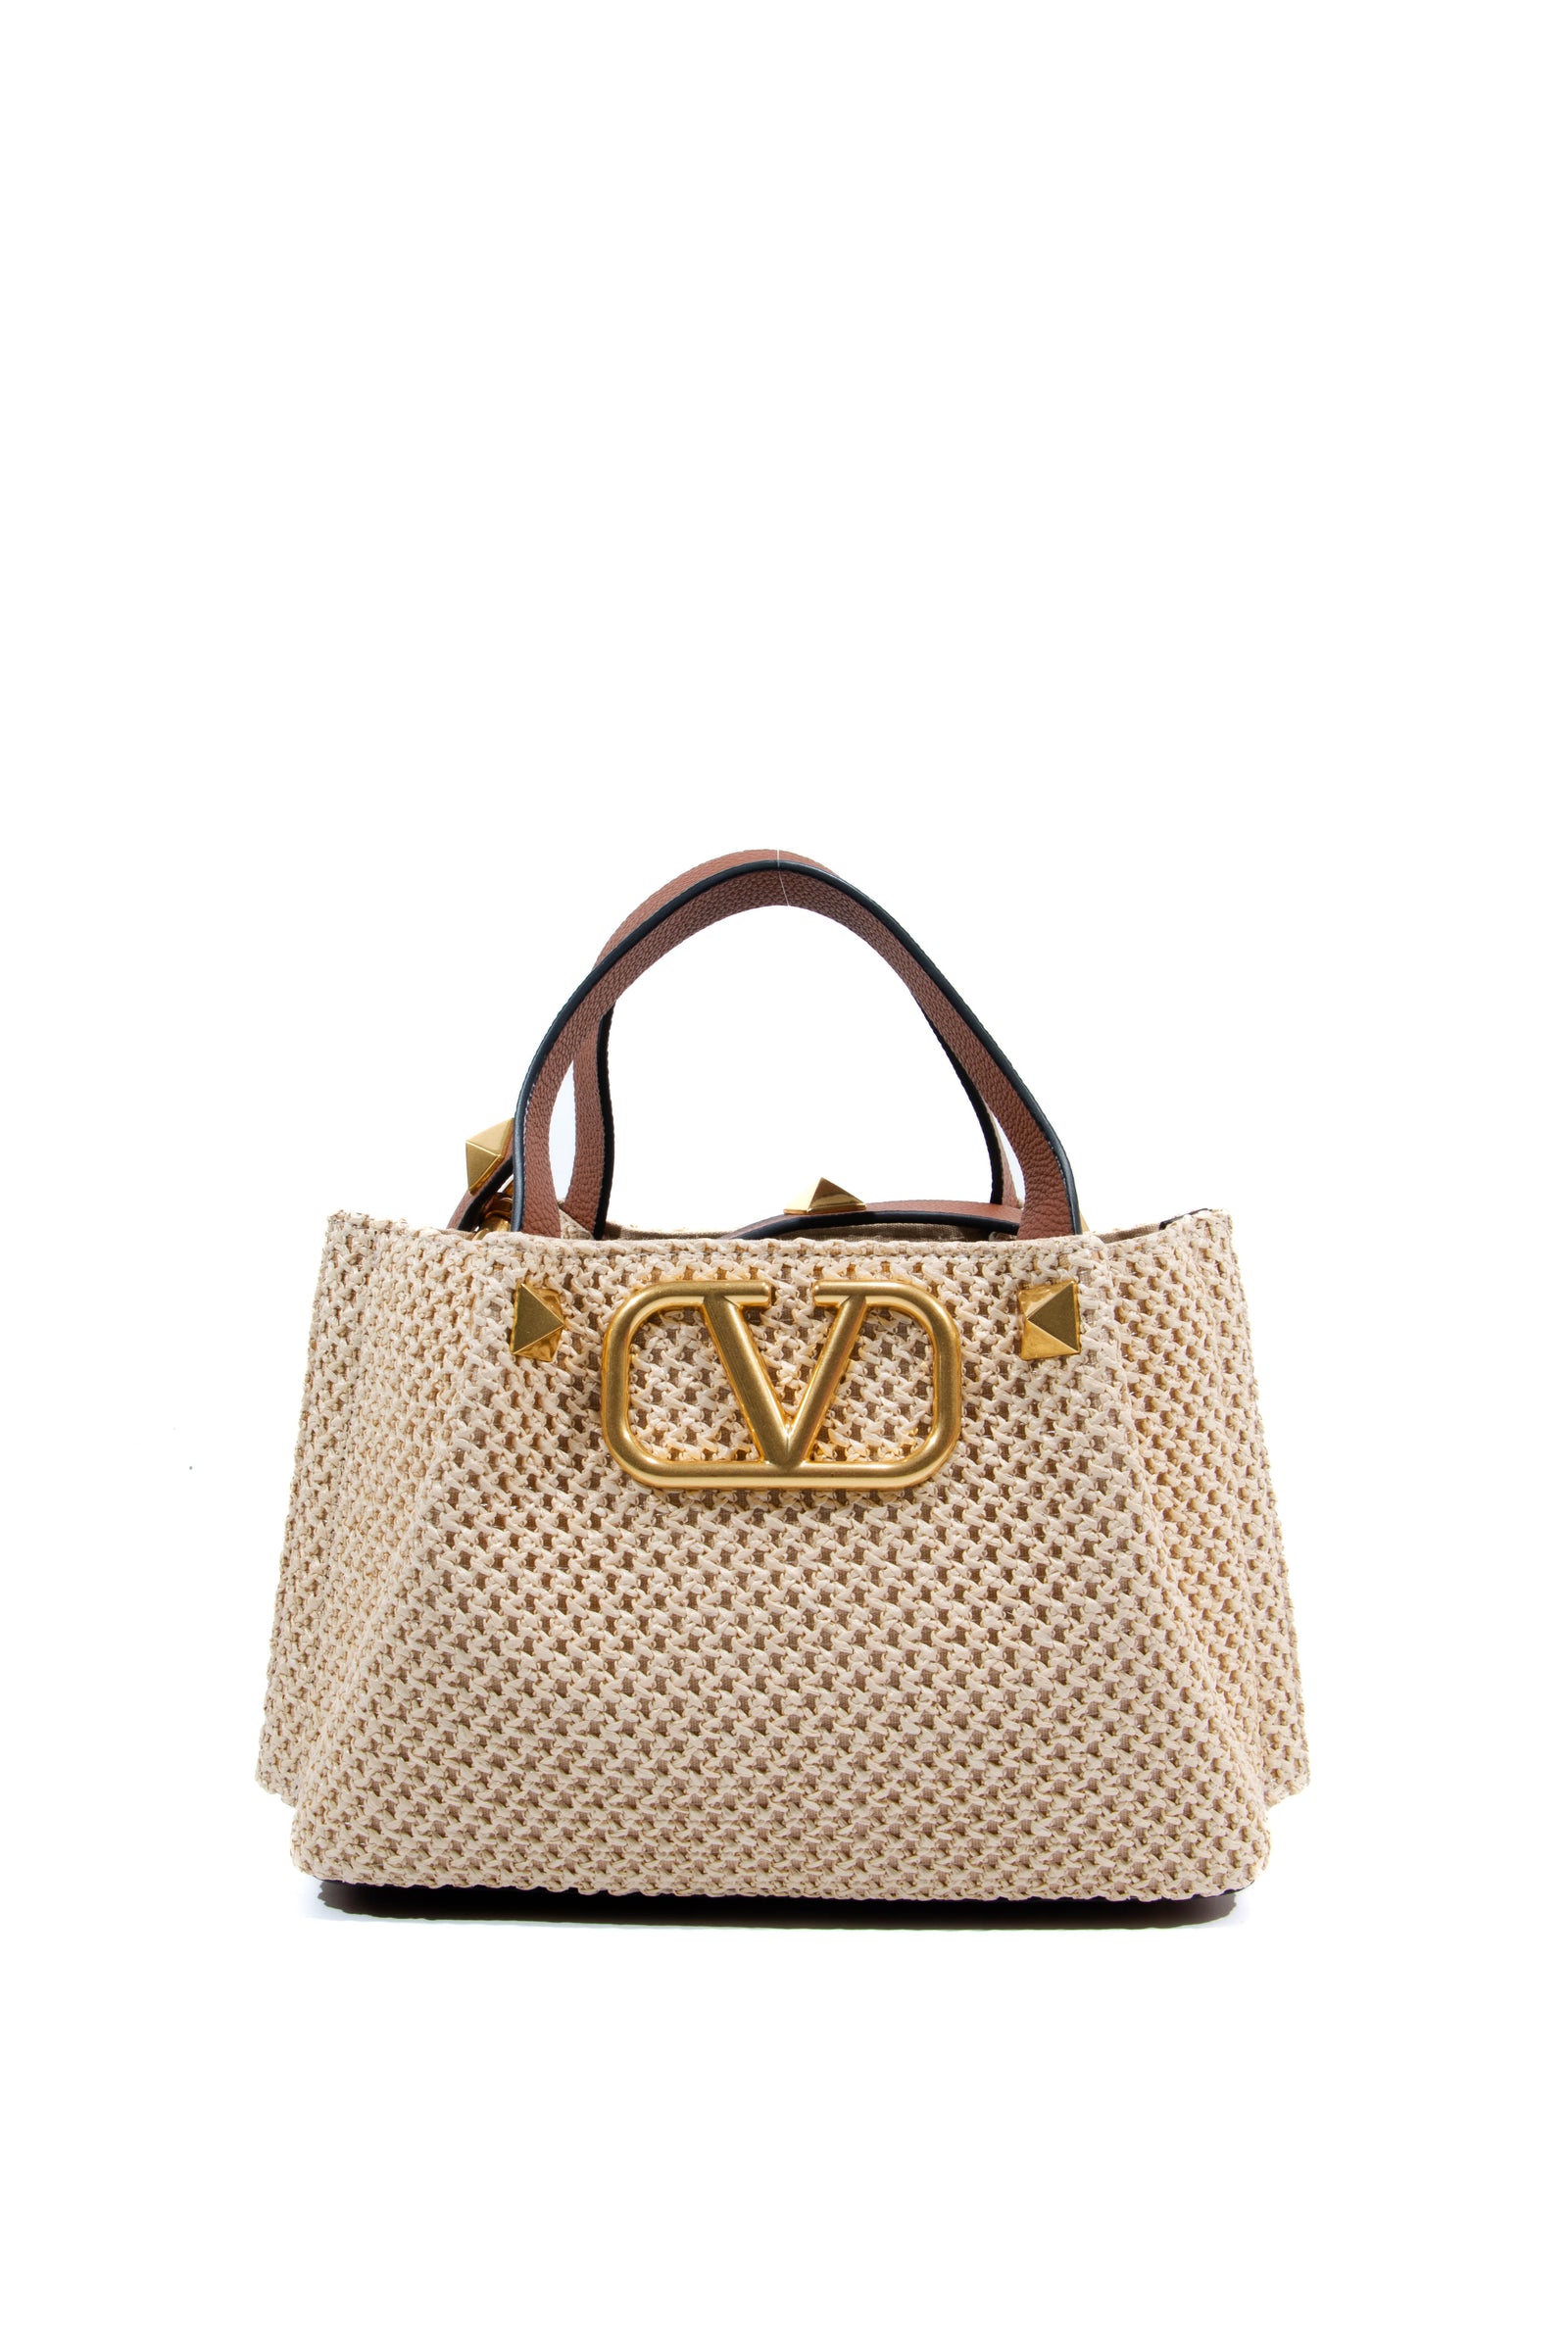 Valentino by Mario Valentino Florenced Chevron-Quilted Leather Shoulder Bag  on SALE